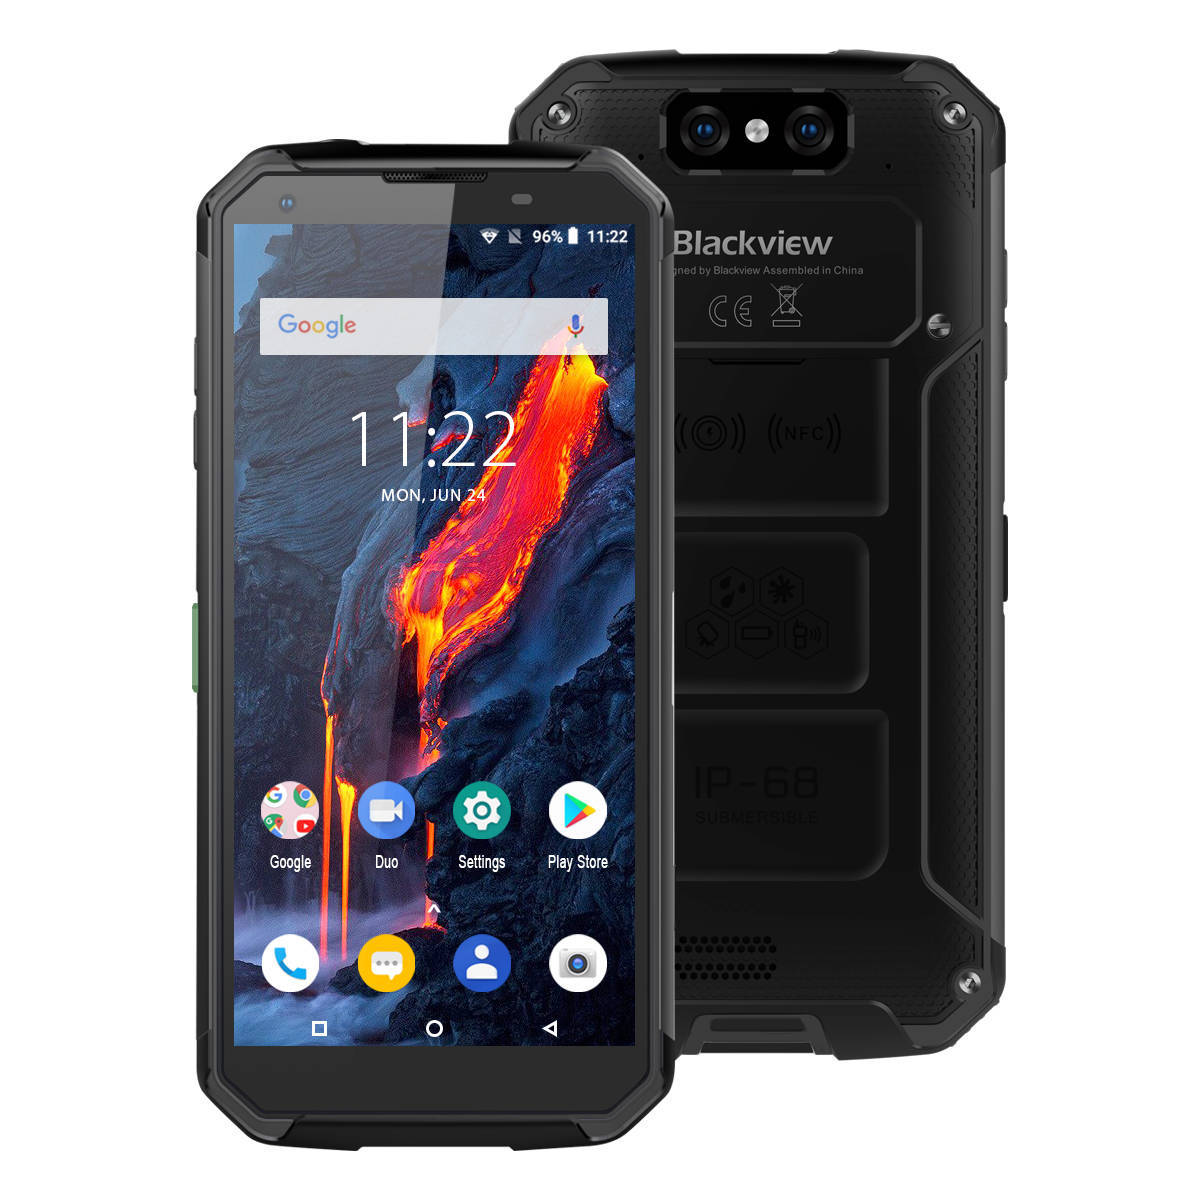 Blackview BV9500 Plus Helio P70 Octa Core Smartphone 10000mAh IP68 Waterproof 5.7inch FHD 4GB + 64GB Android 9.0 Mobile phone